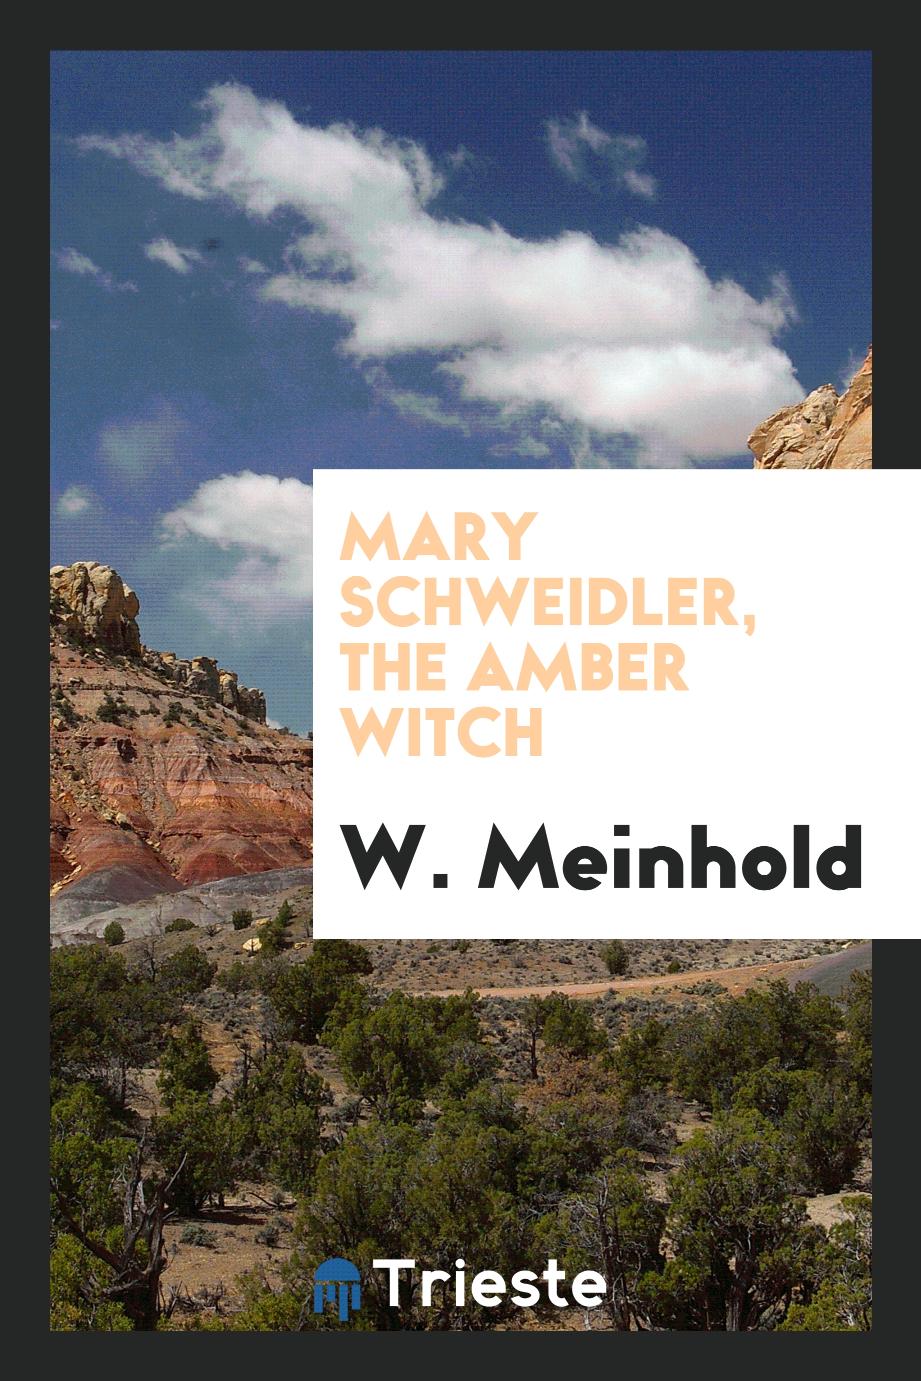 Mary Schweidler, the amber witch